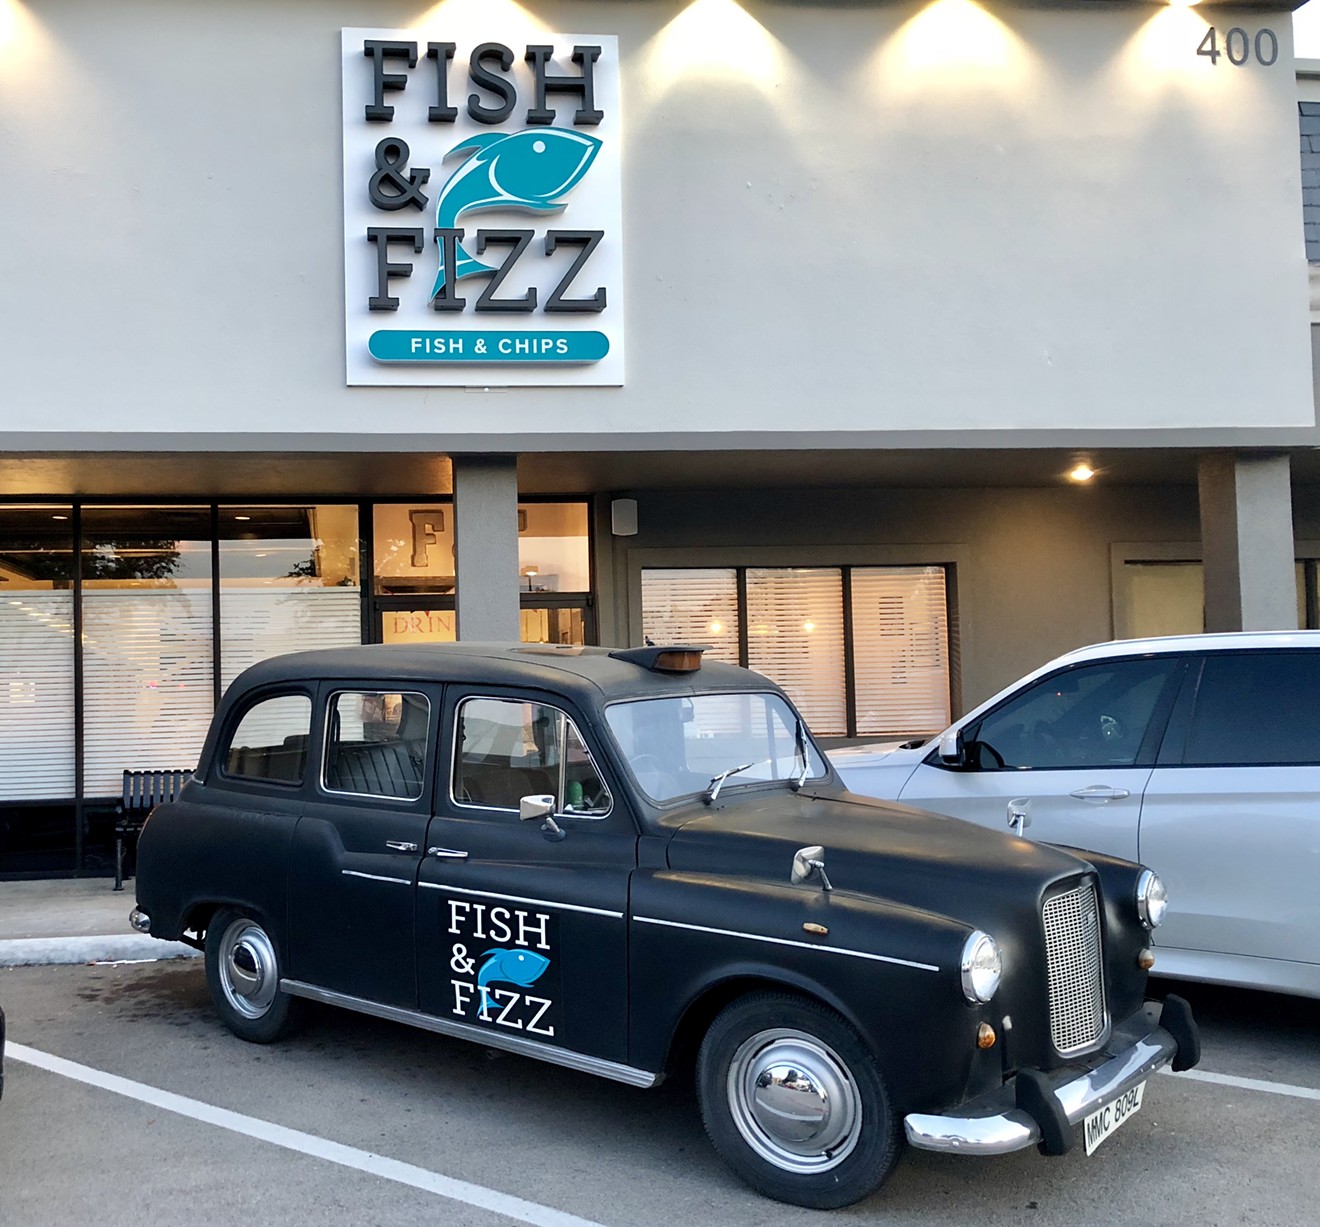 It's easy to spot Fish & Fizz with the vintage London taxi parked out front.